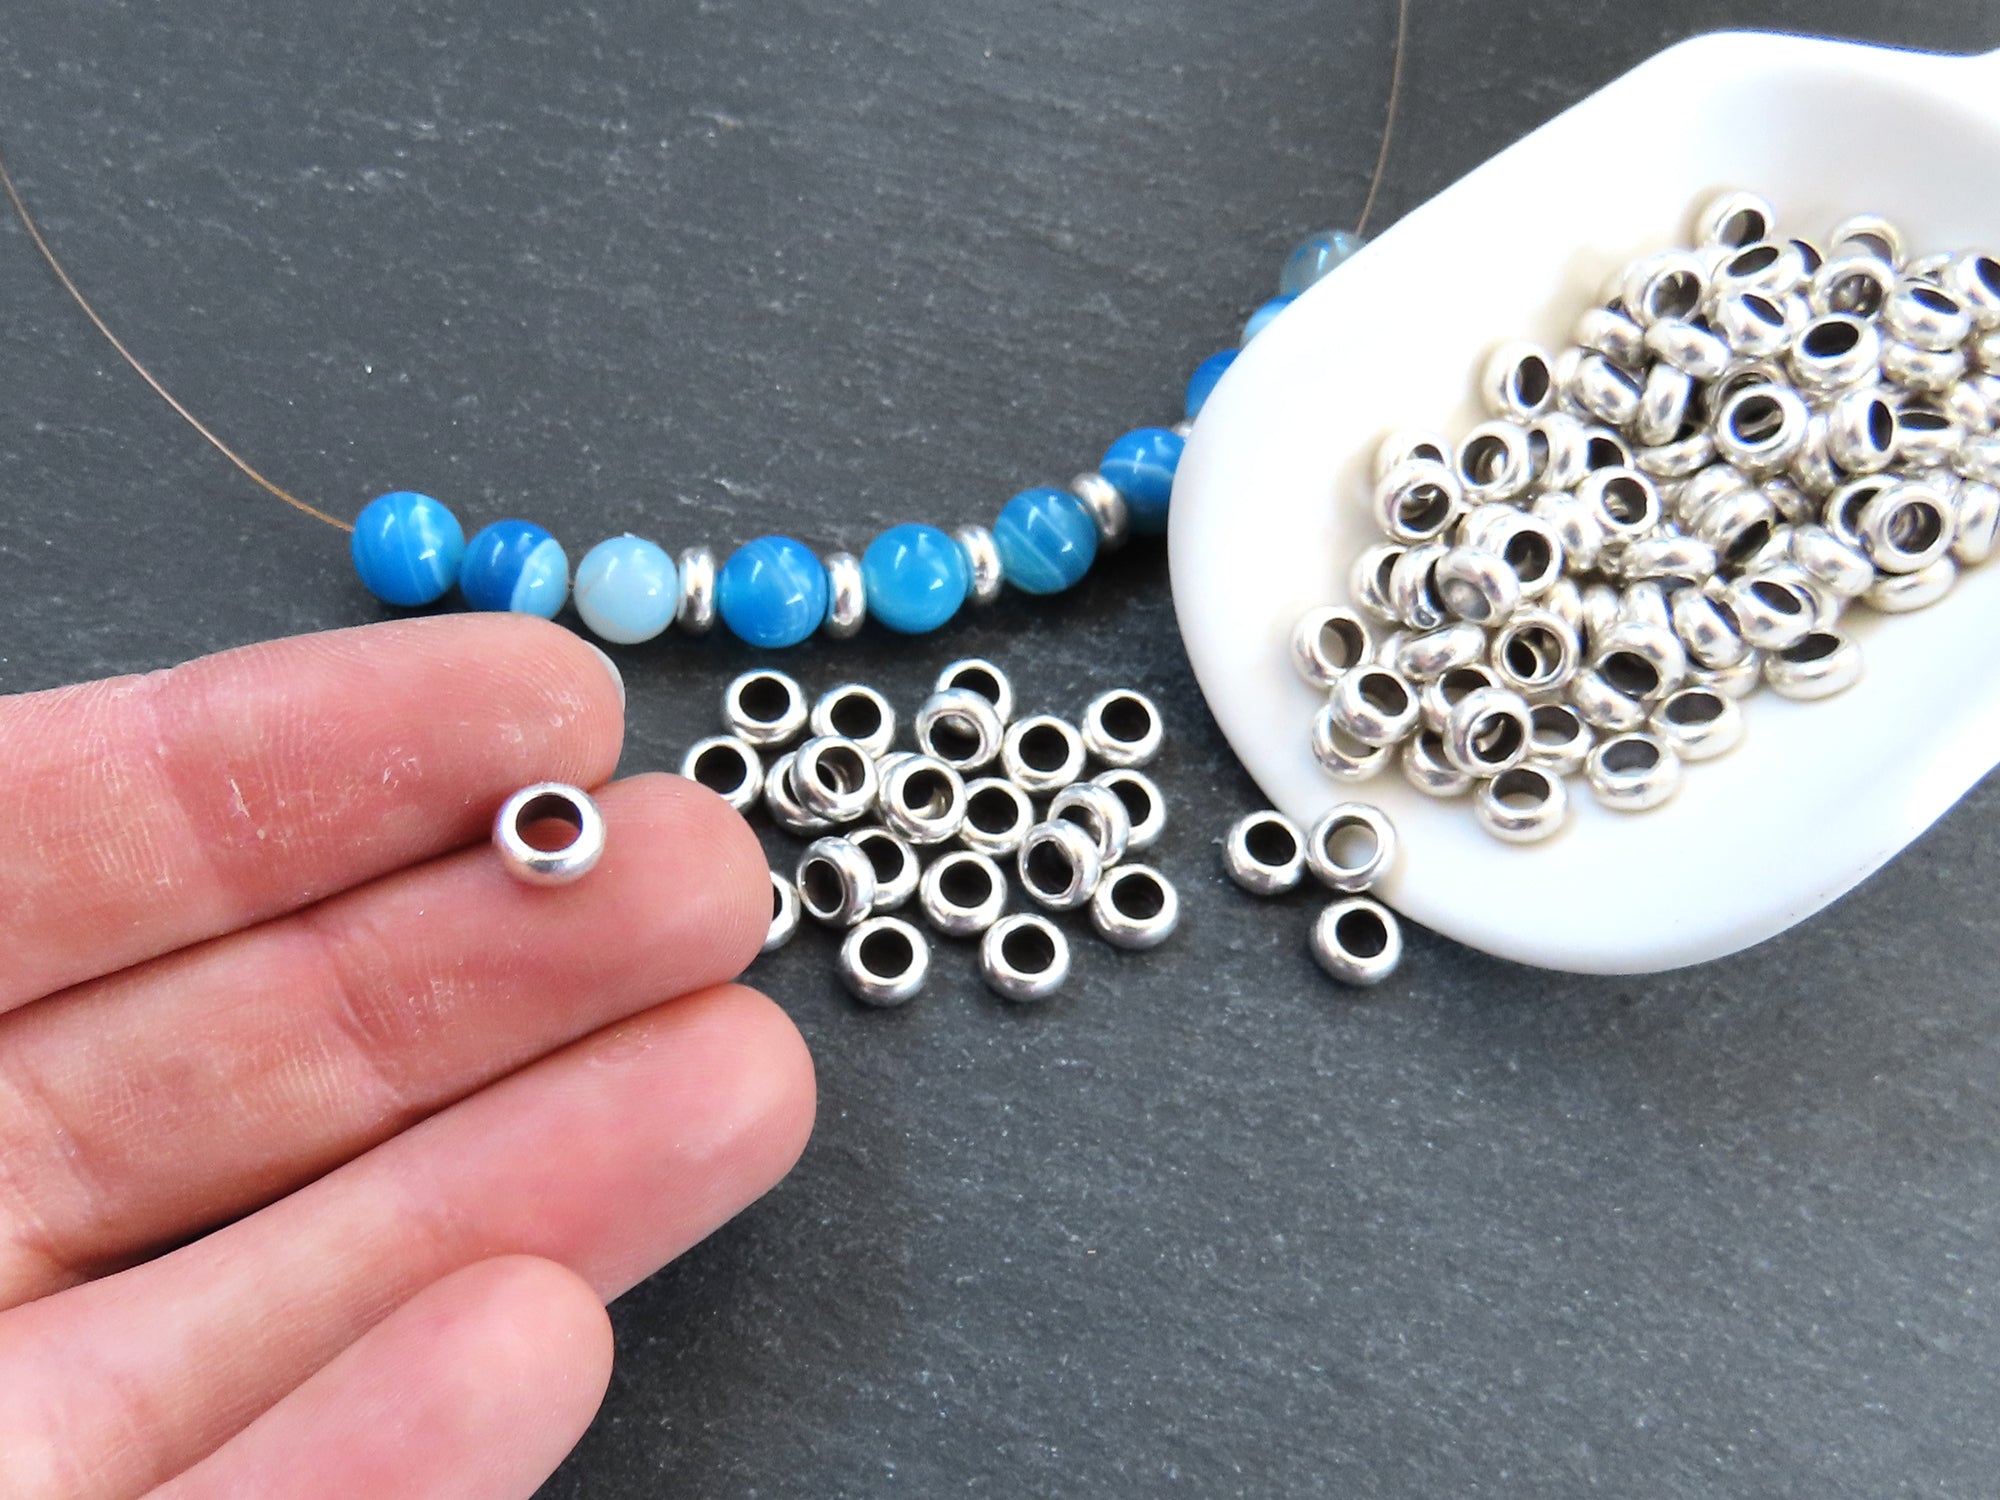 Small Silver Washer Bead Spacers Mykonos Greek Beads Organic 